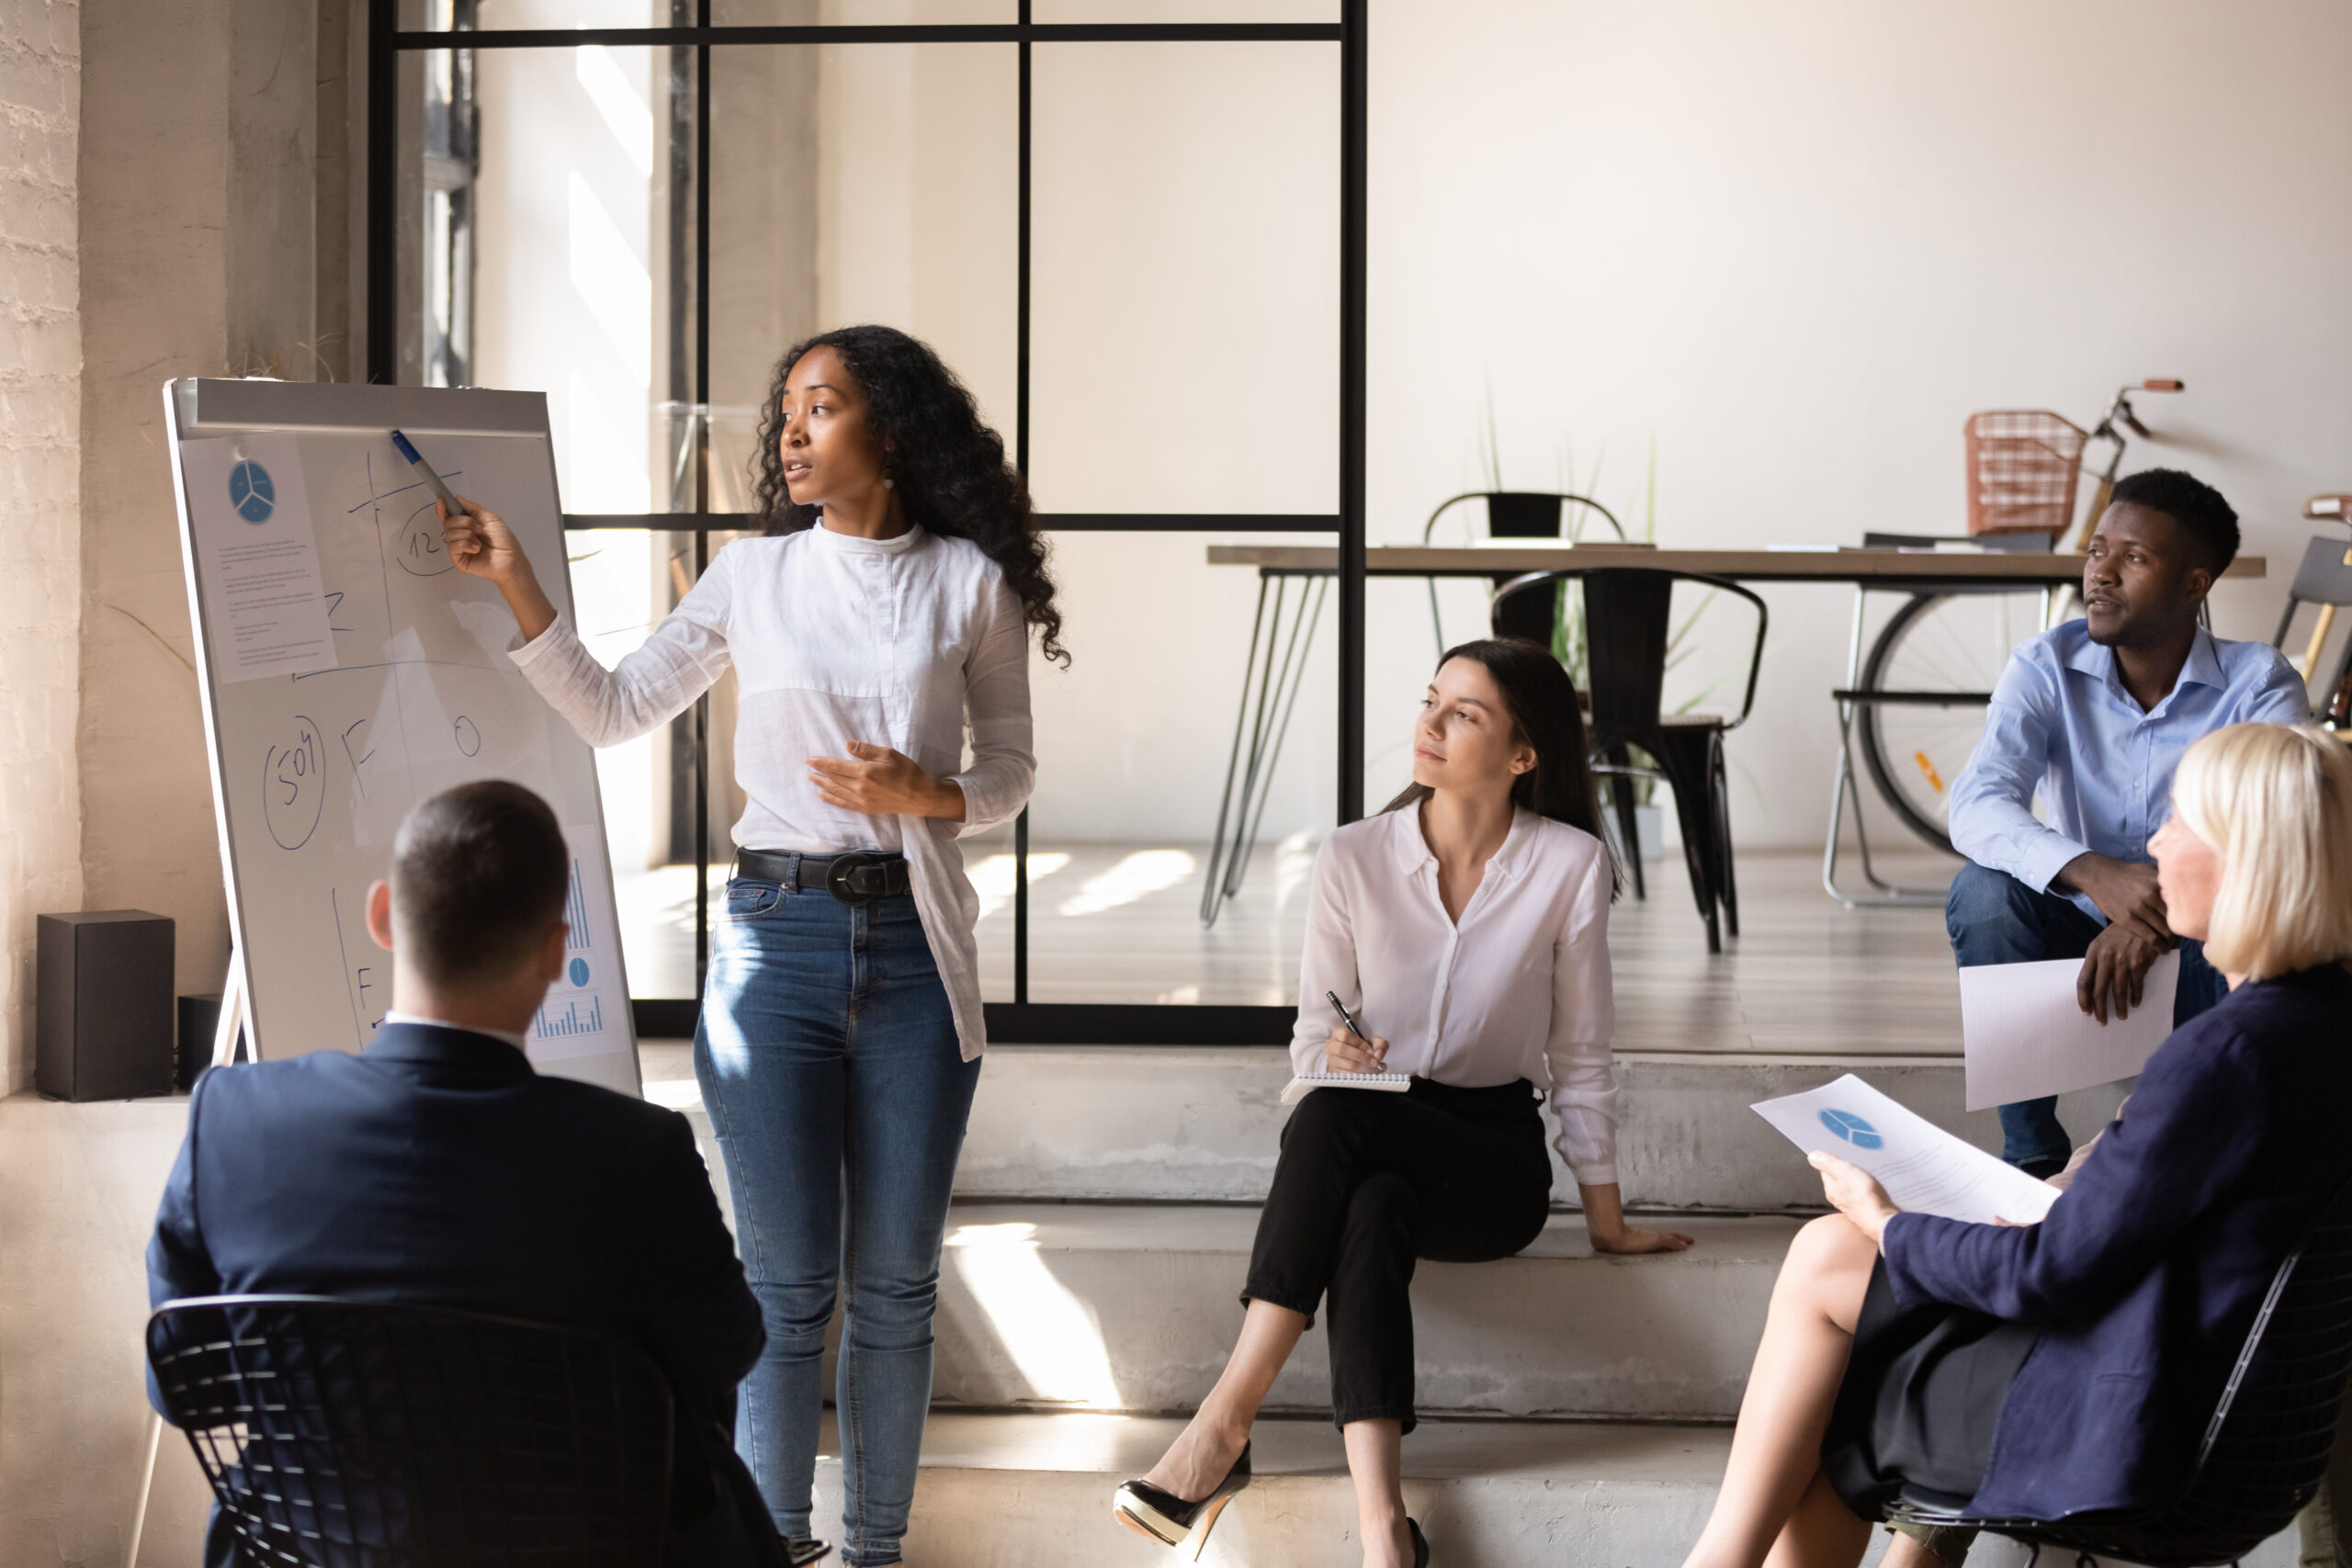 A businesswoman points to a white board, leading a group of four other people in a brainstorming discussion.